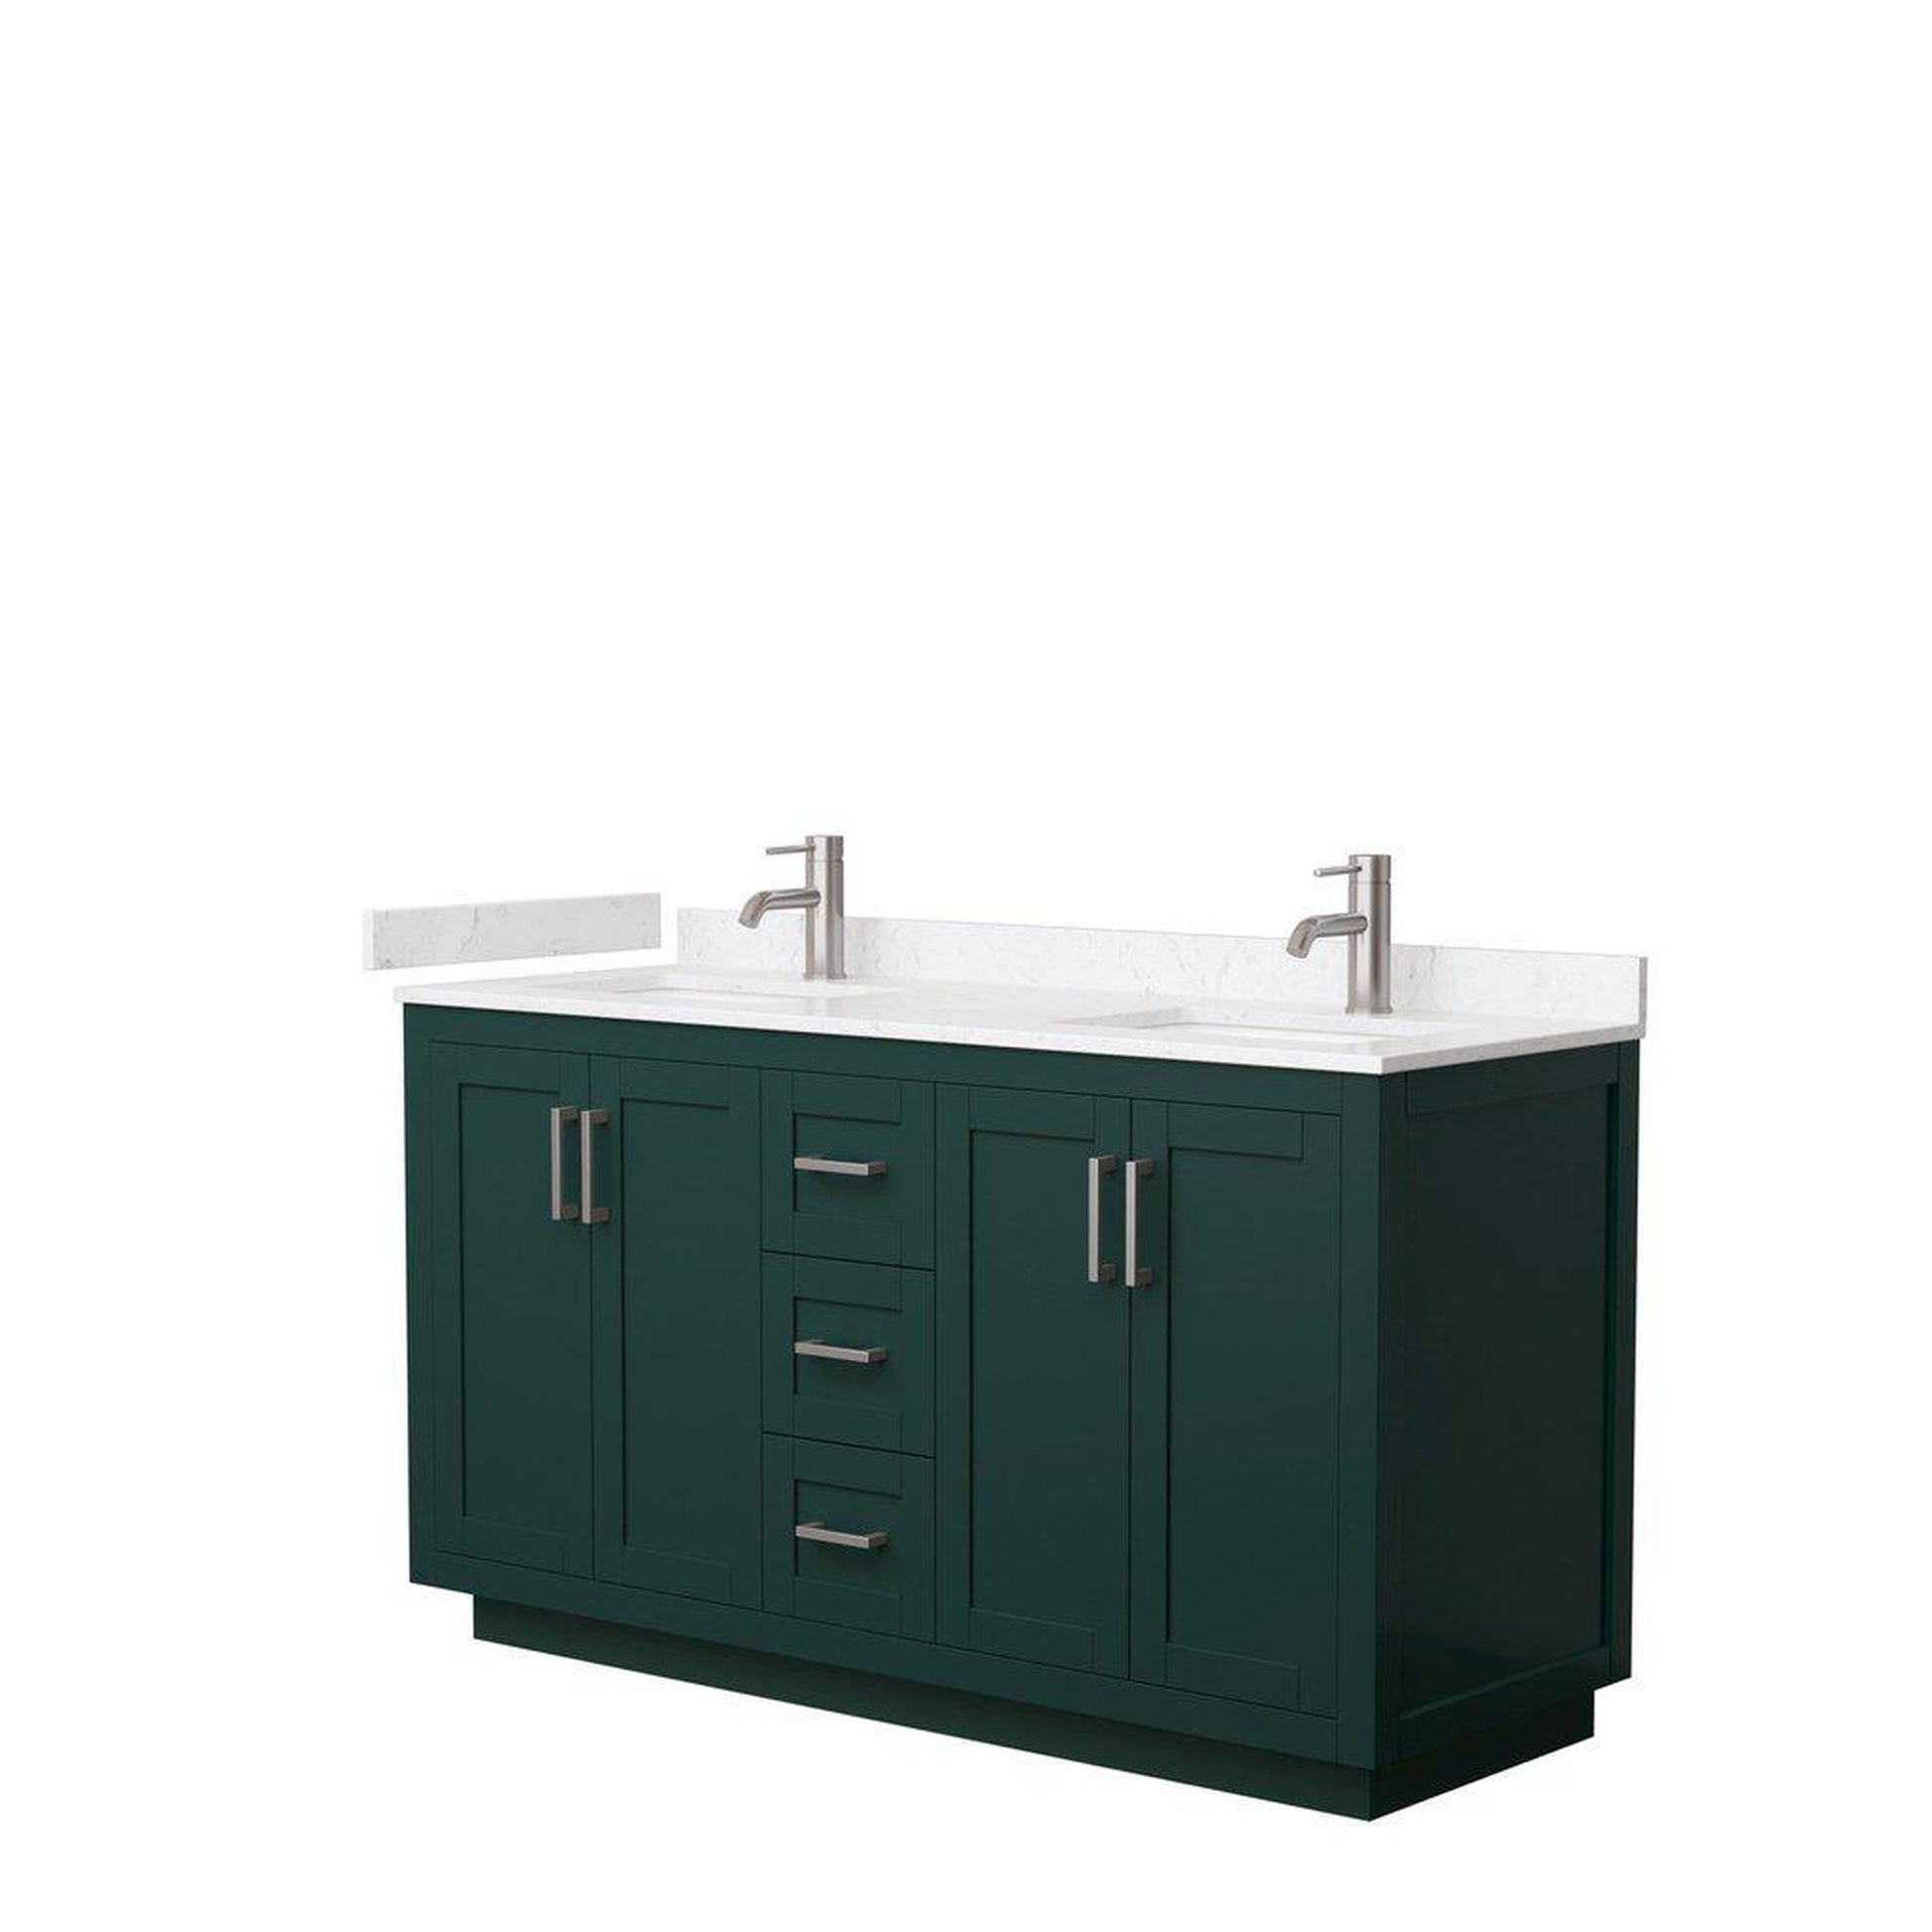 Wyndham Collection Miranda 60" Double Bathroom Green Vanity Set With Light-Vein Carrara Cultured Marble Countertop, Undermount Square Sink, And Brushed Nickel Trim